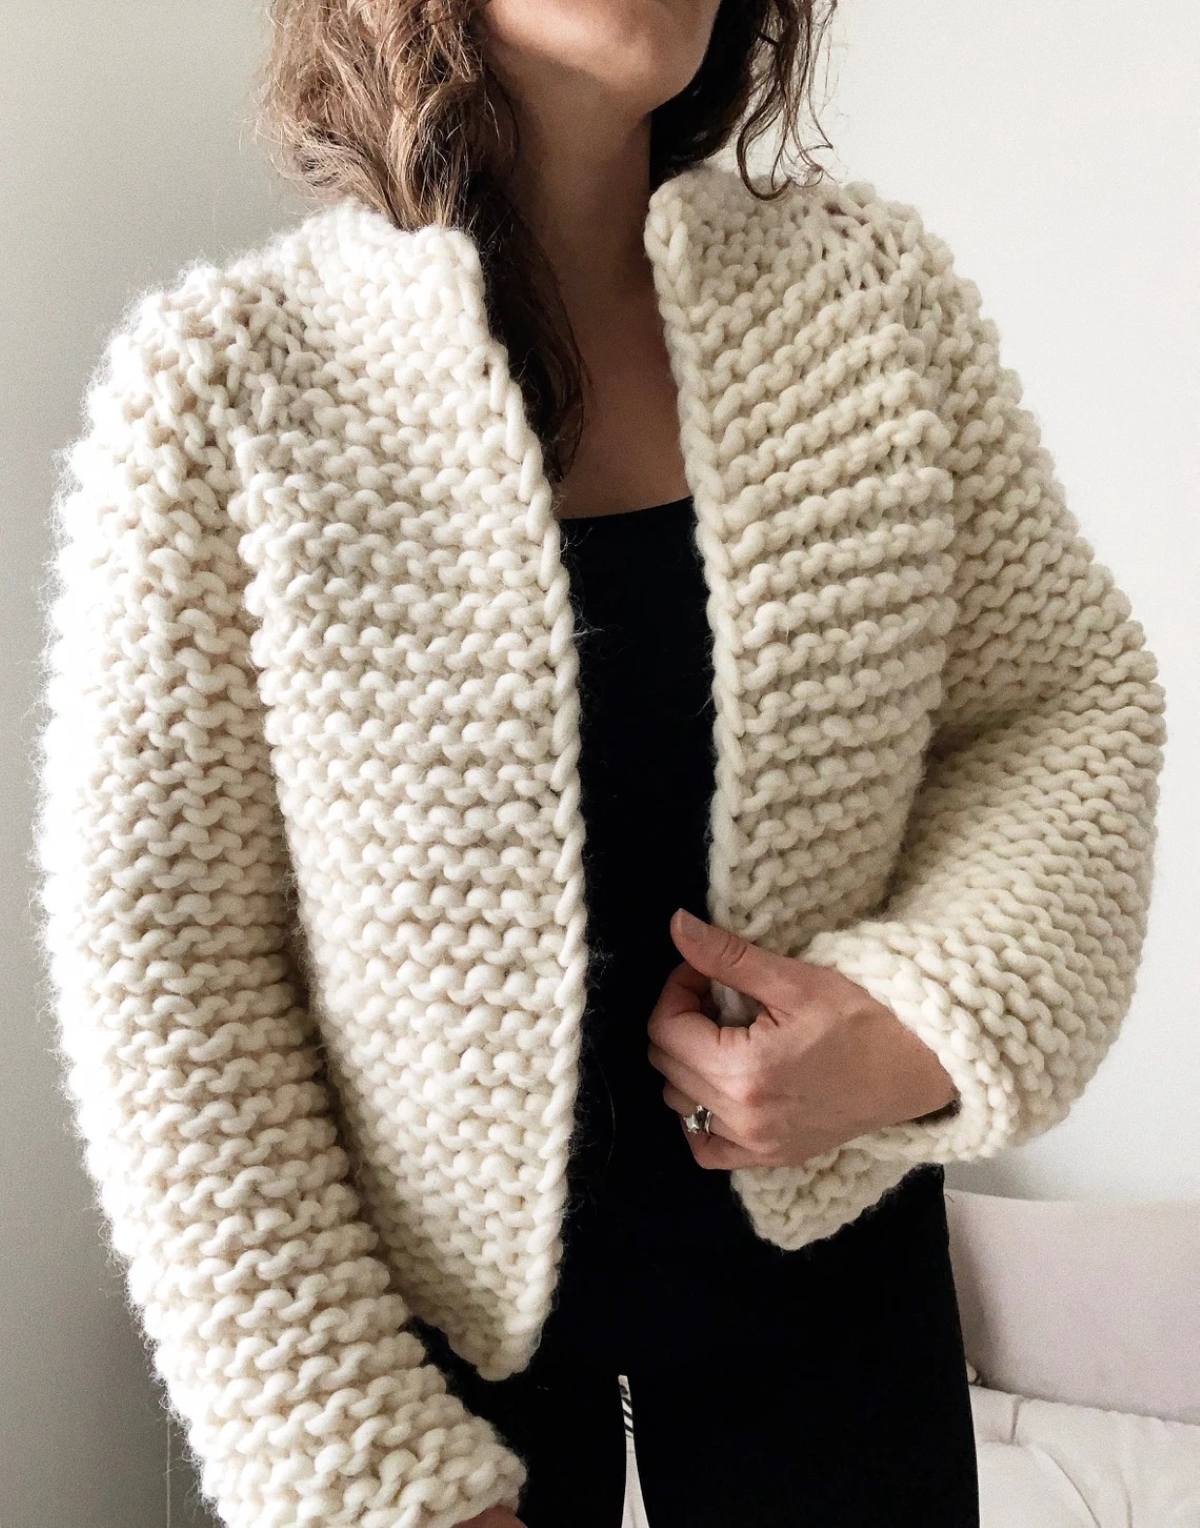 knitting patterns for beginners - white knitted wool jacket